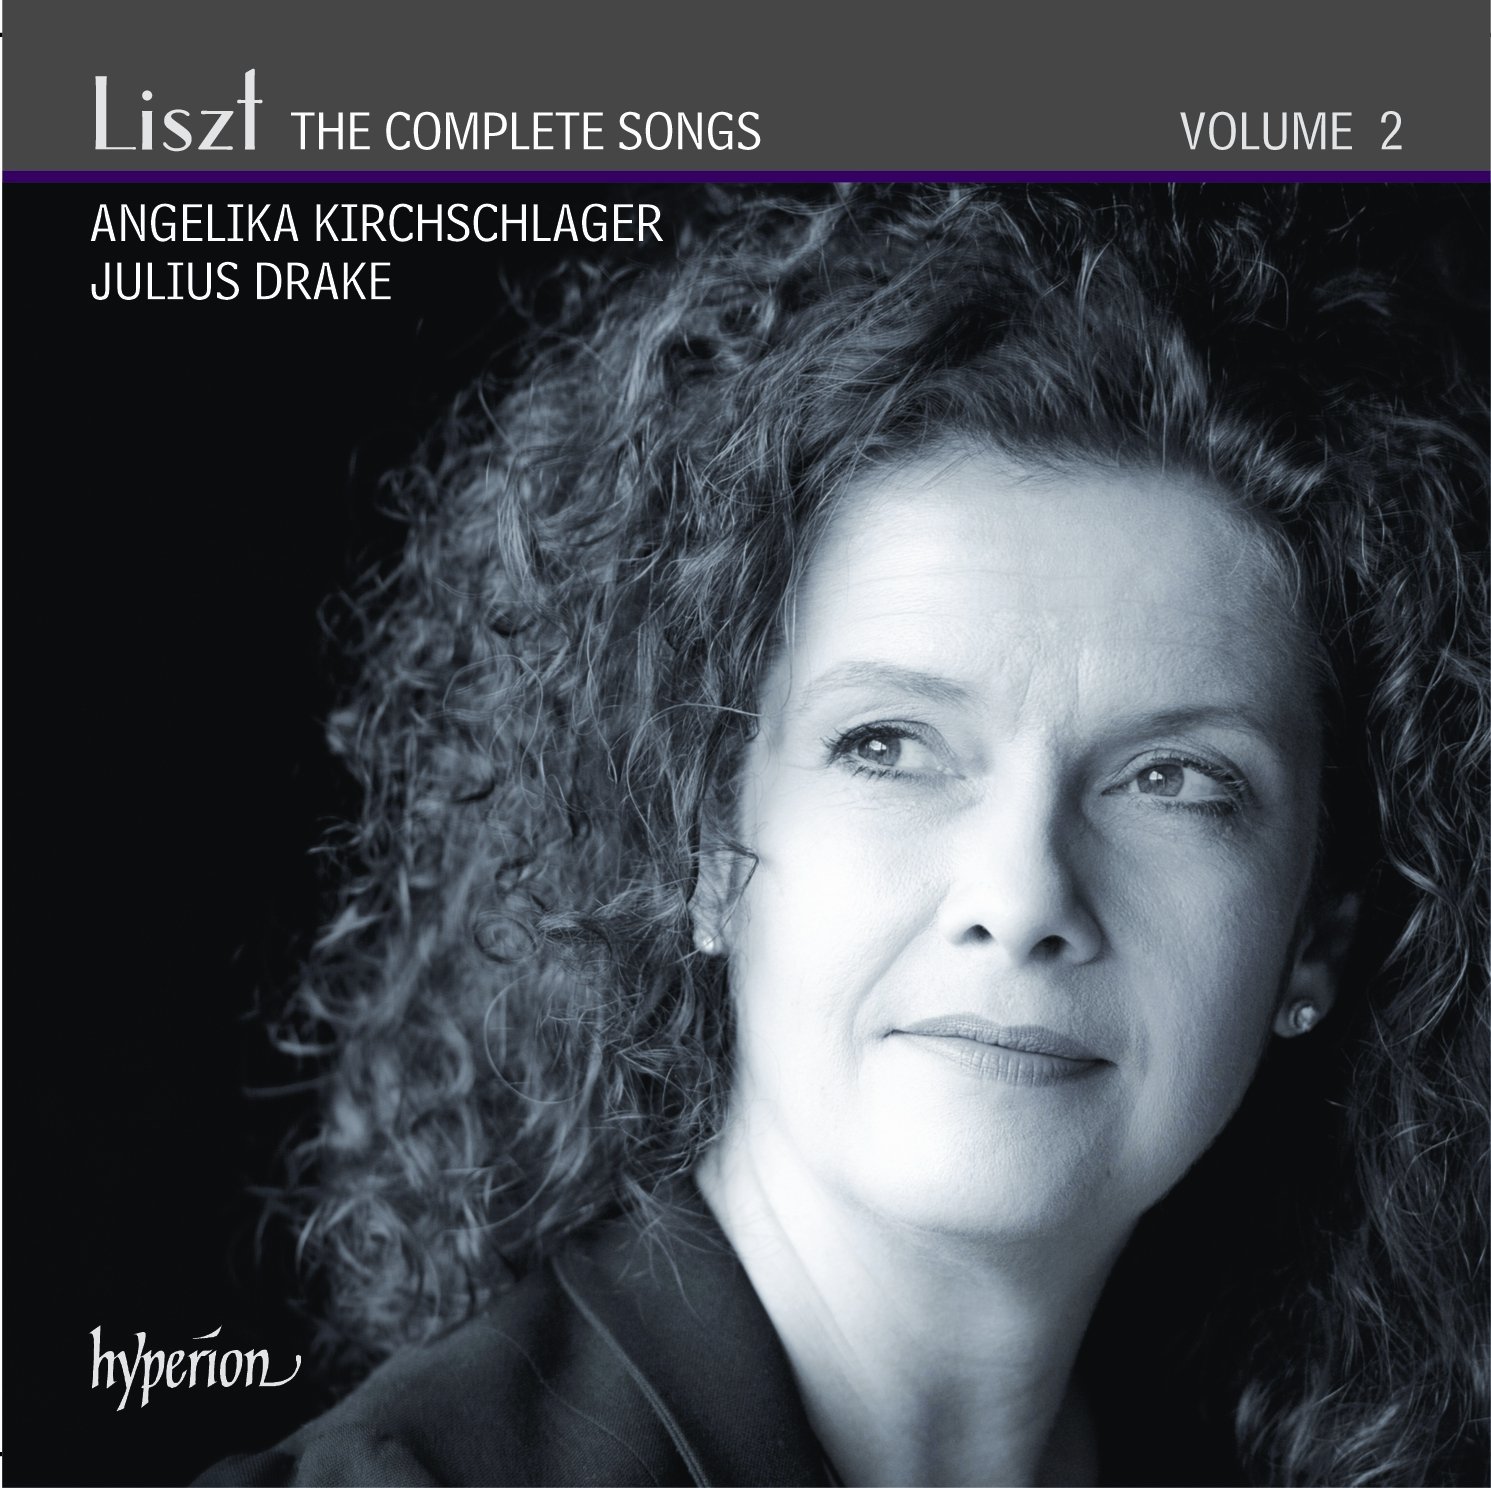 Angelika Kirchschlager, The Complete Songs Vol.2 by Liszt